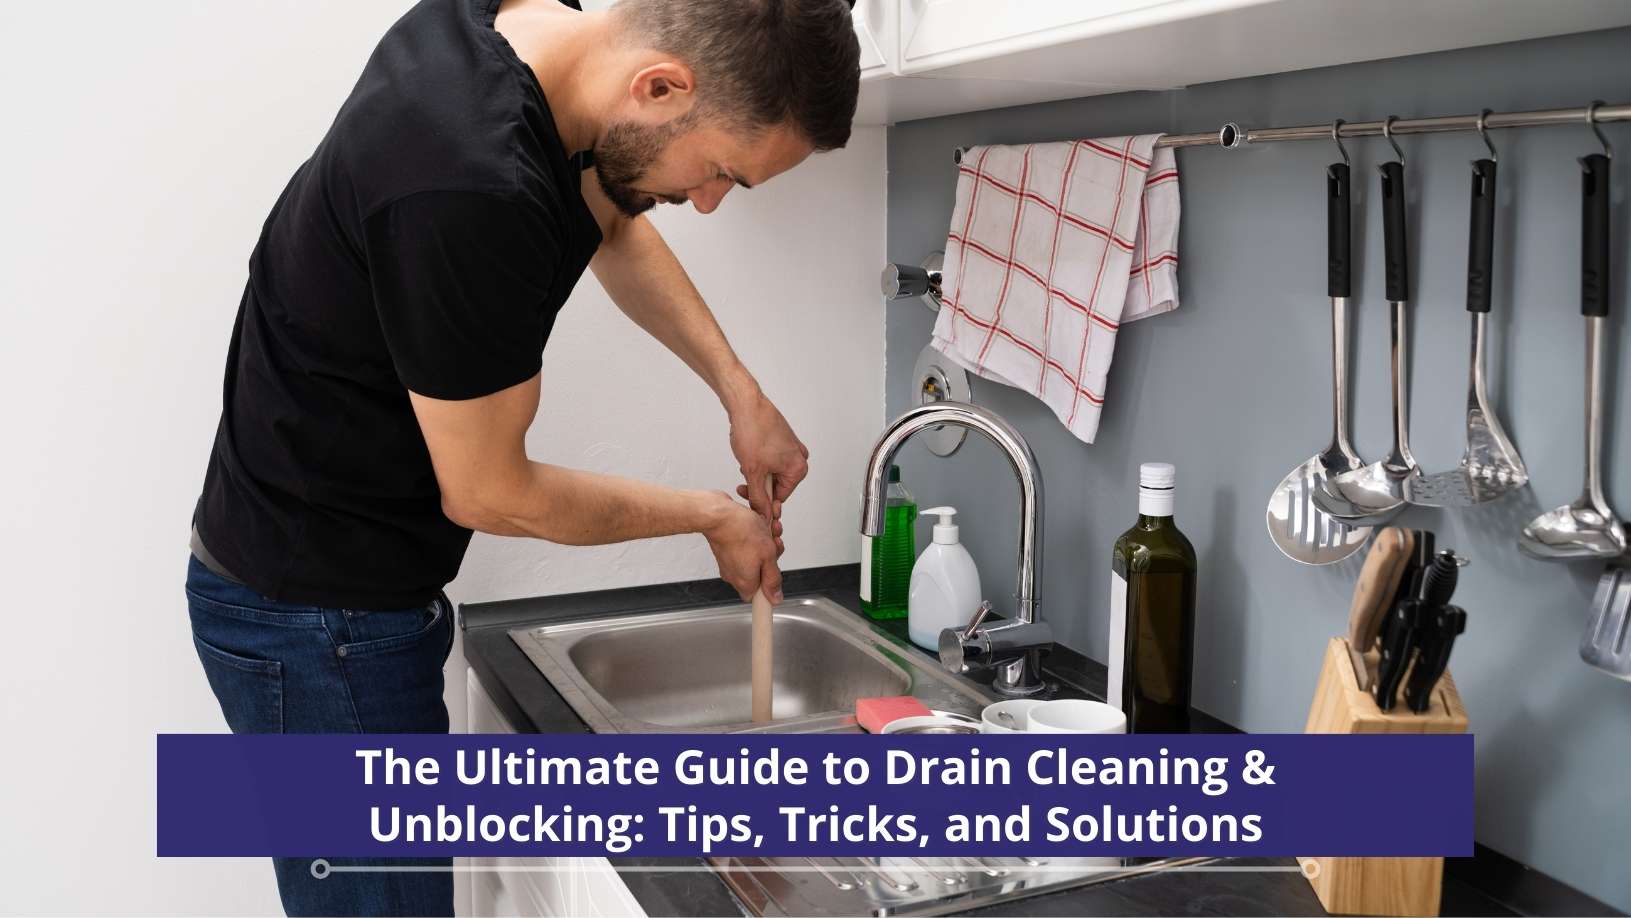 Drain Cleaning & Unblocking Tips